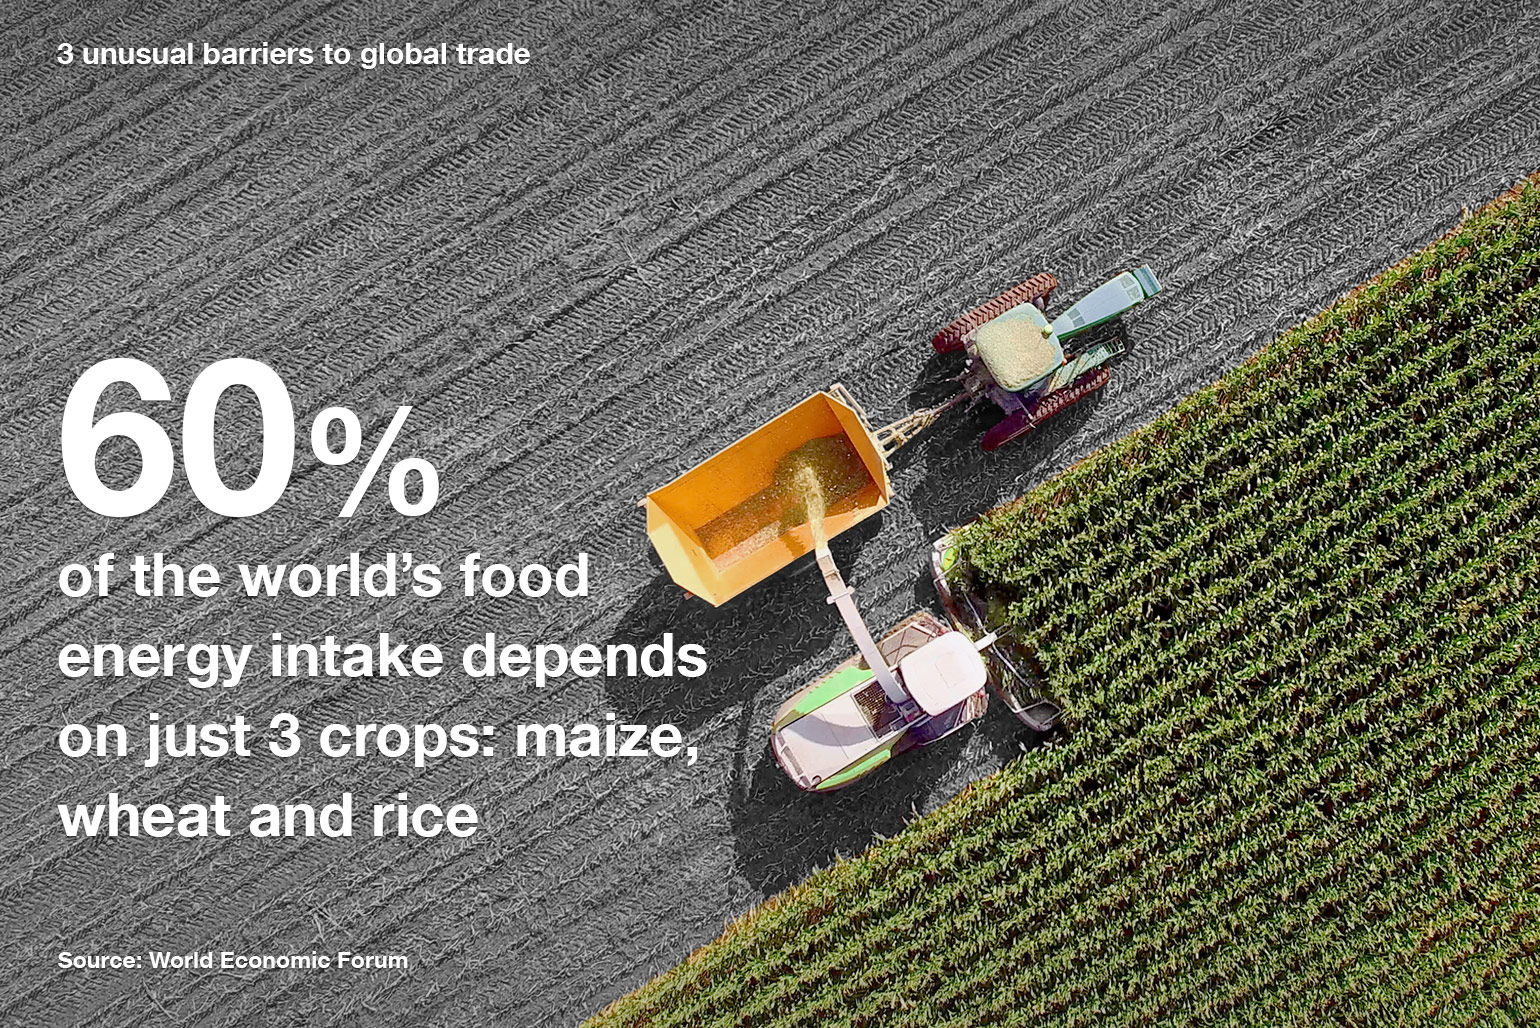 60% of the world's food energy intake depends on 3 crops